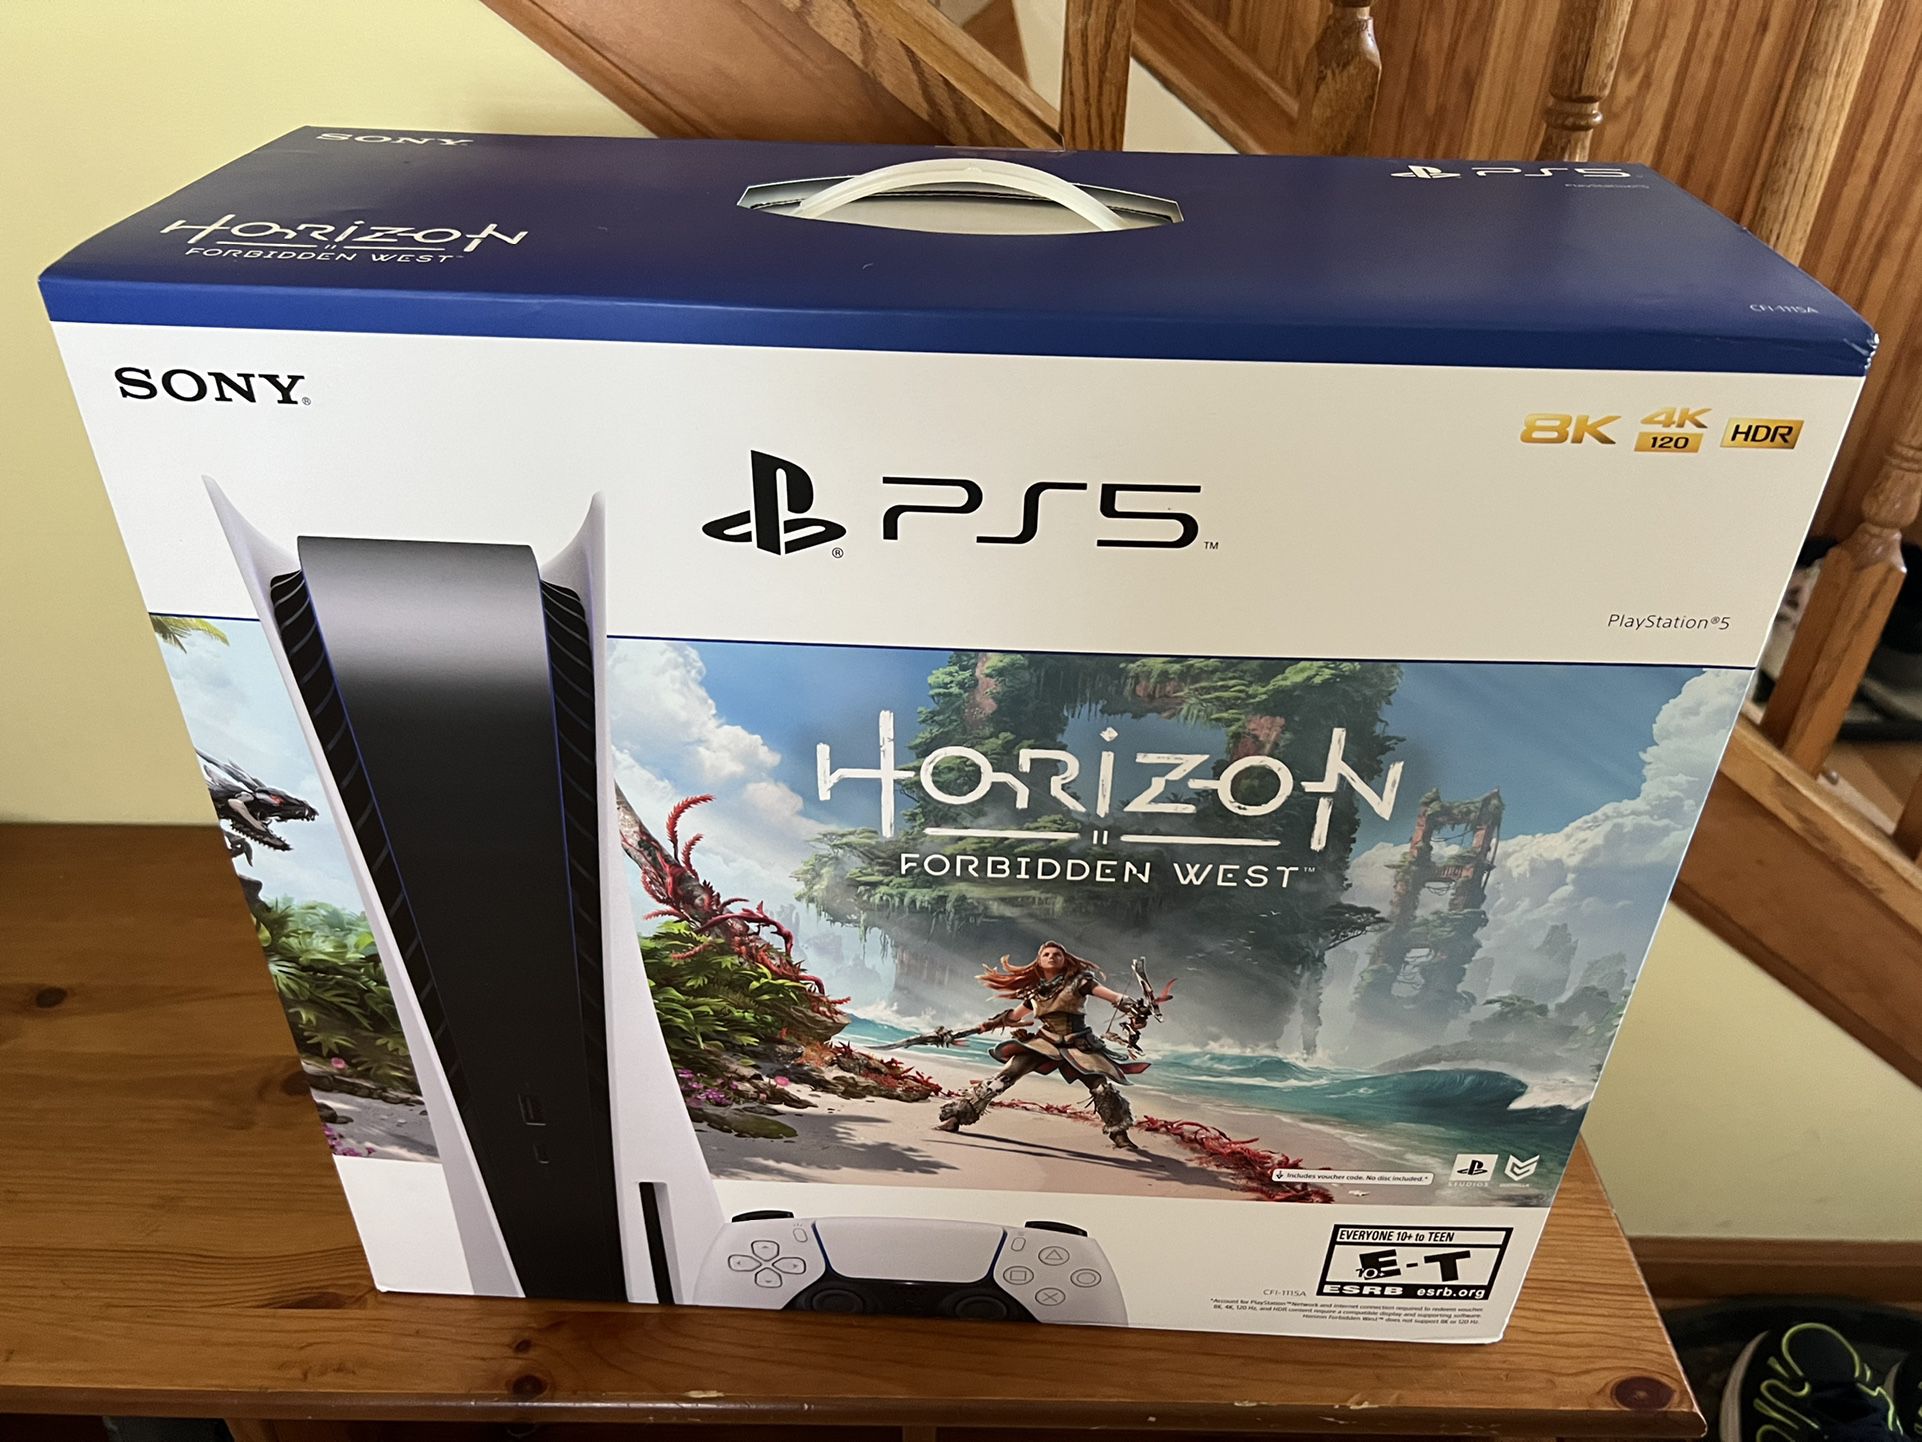 Brand New- PS5 Disc Version- Horizon Bundle- Factory Sealed- includes digital code for Horizon - Forbidden West game- with receipt- Immediate pickup